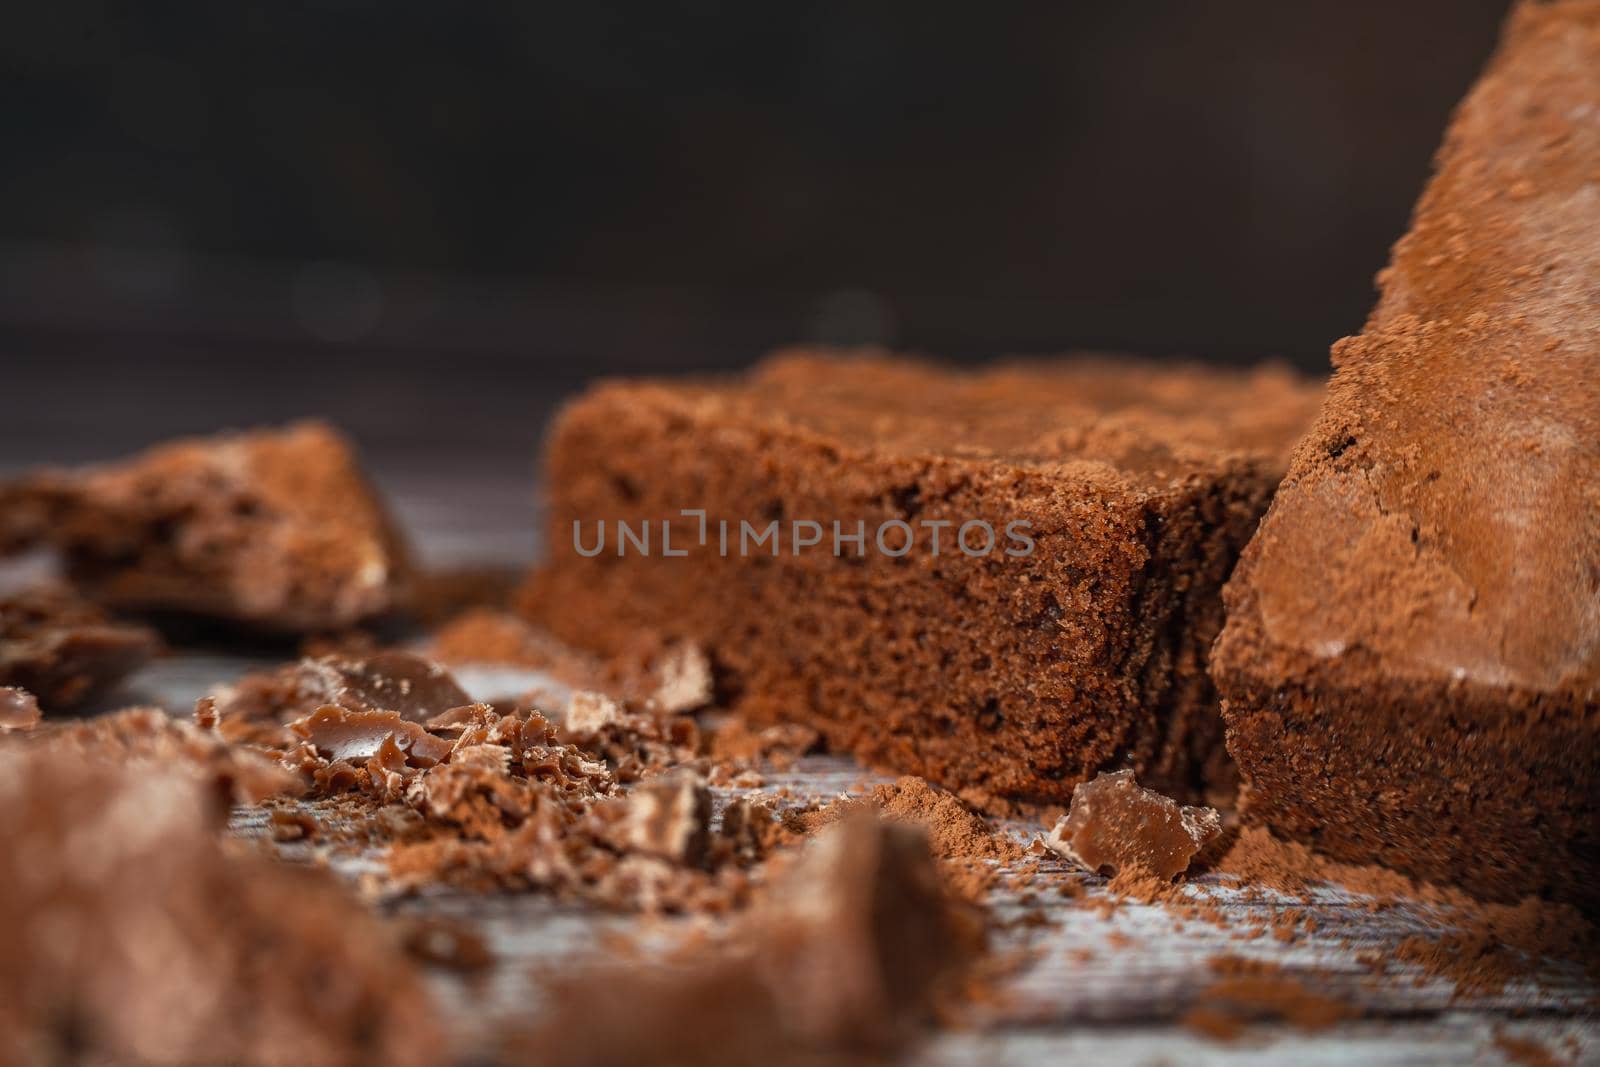 Chocolate brownies on a rustic wooden table with chocolate chips and chocolate soil next to the brownie portions.Close up. by hdcaputo